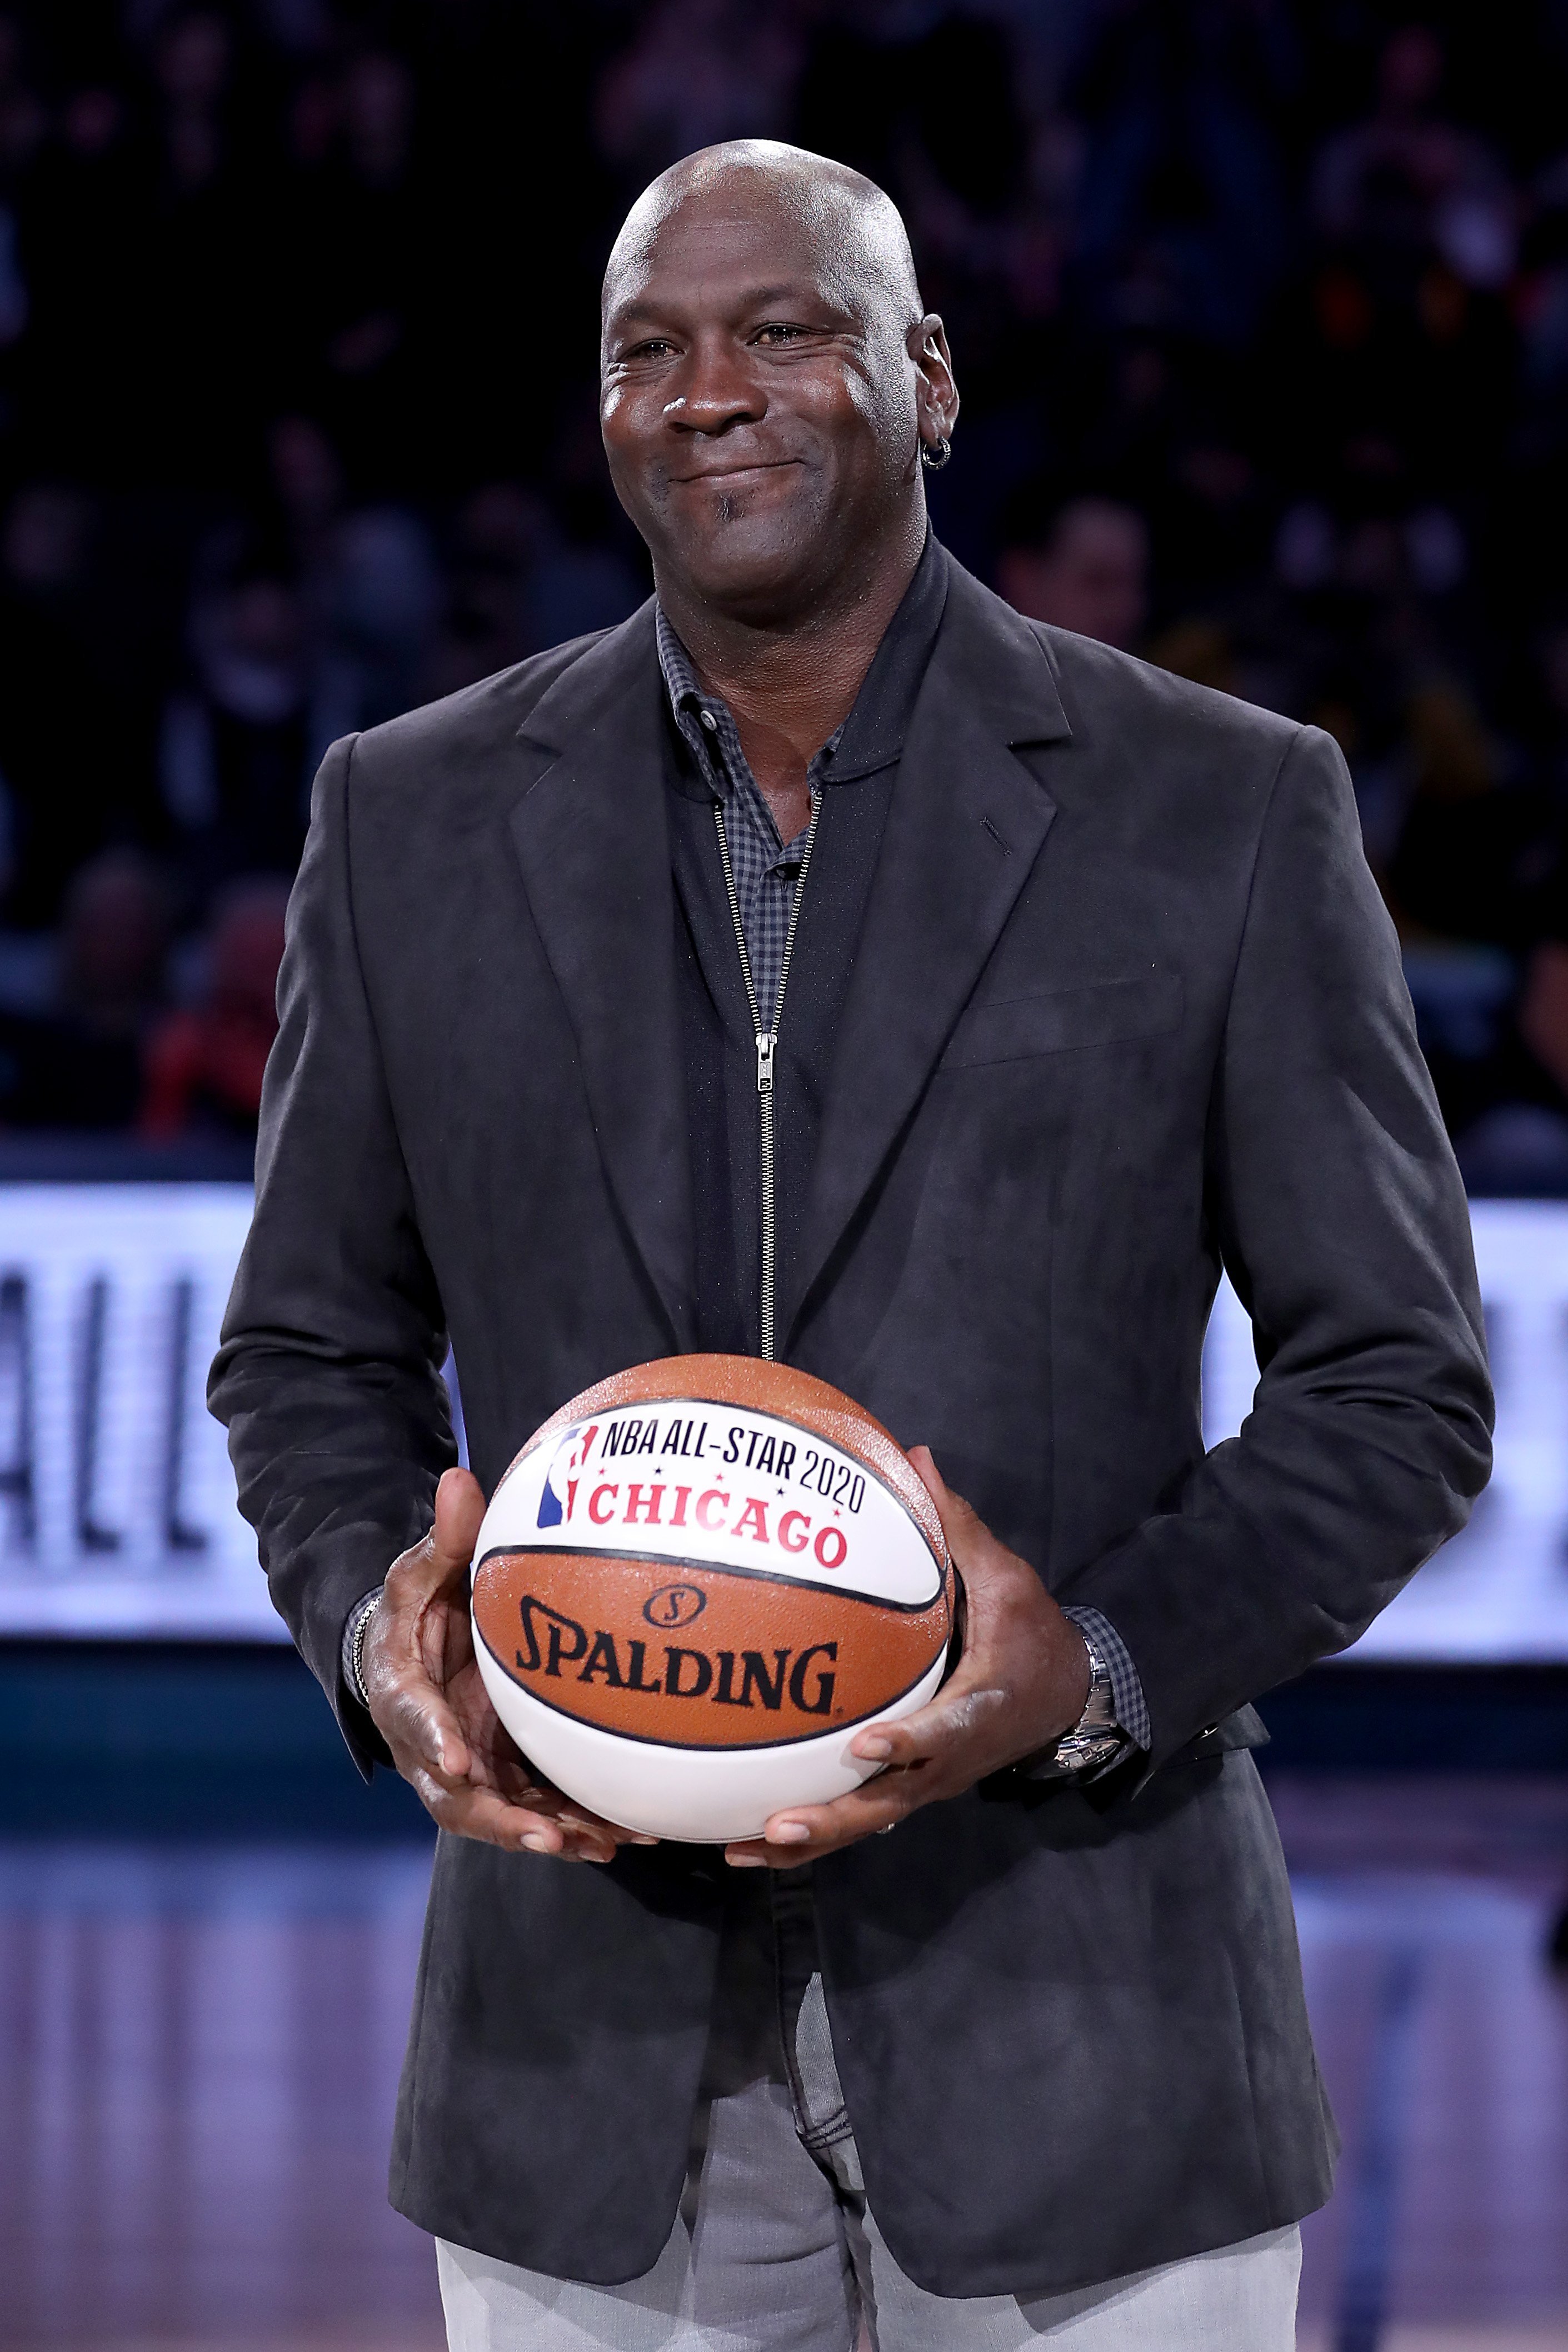 Michael Jordan takes part in a ceremony honoring the 2020 NBA All-Star game on Feb. 17, 2019 in North Carolina. | Photo: Getty Images